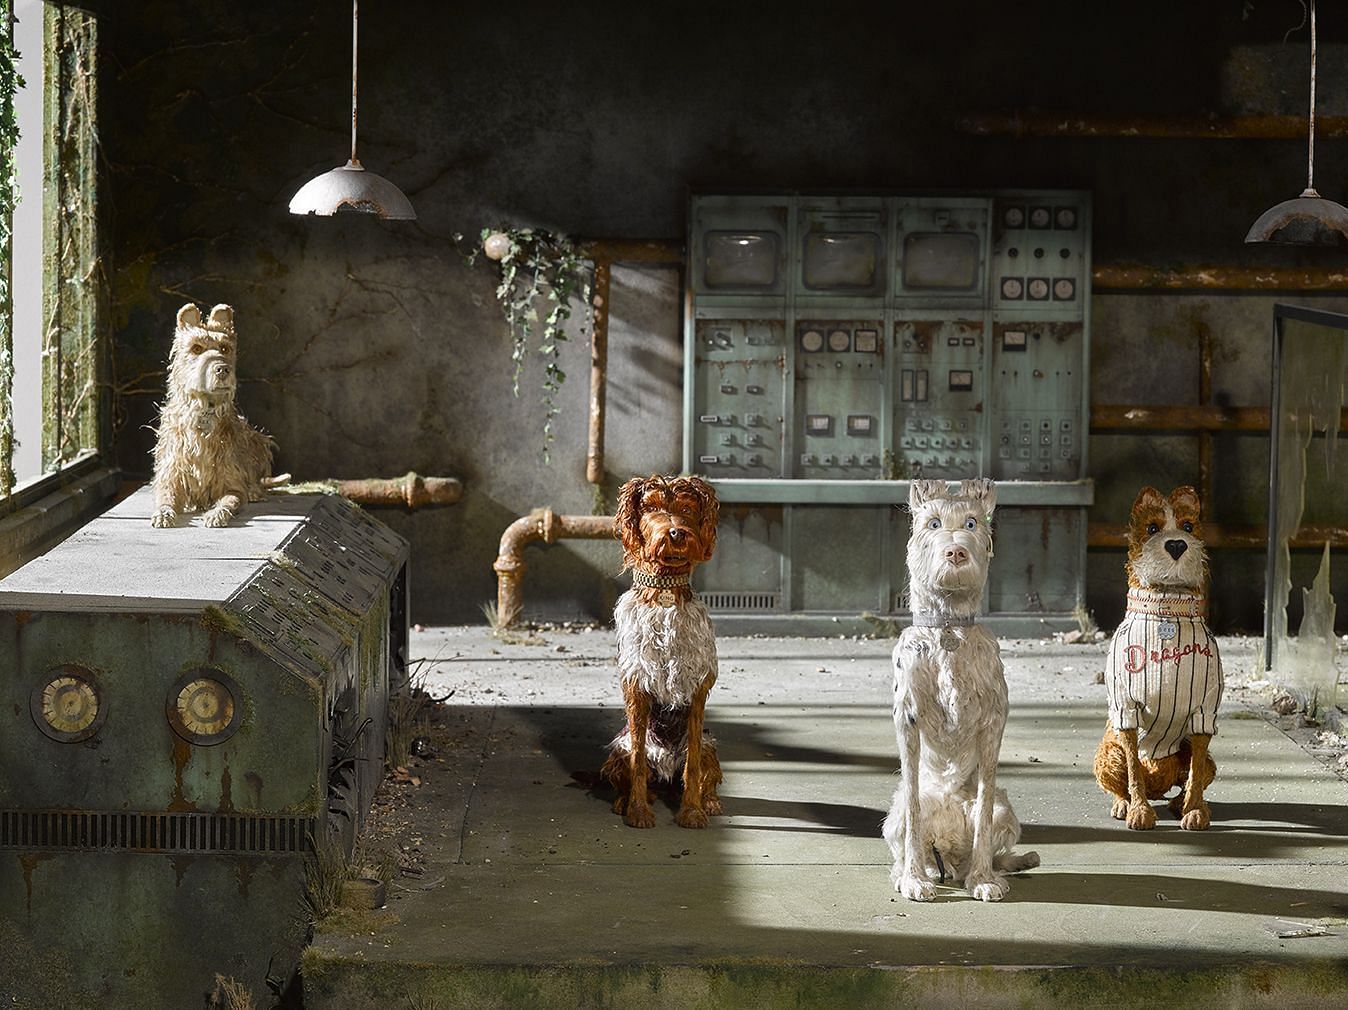 A zany cast of canines act as prototypical Wes Anderson characters in story of animal rebellion (Image via Wes Anderson)